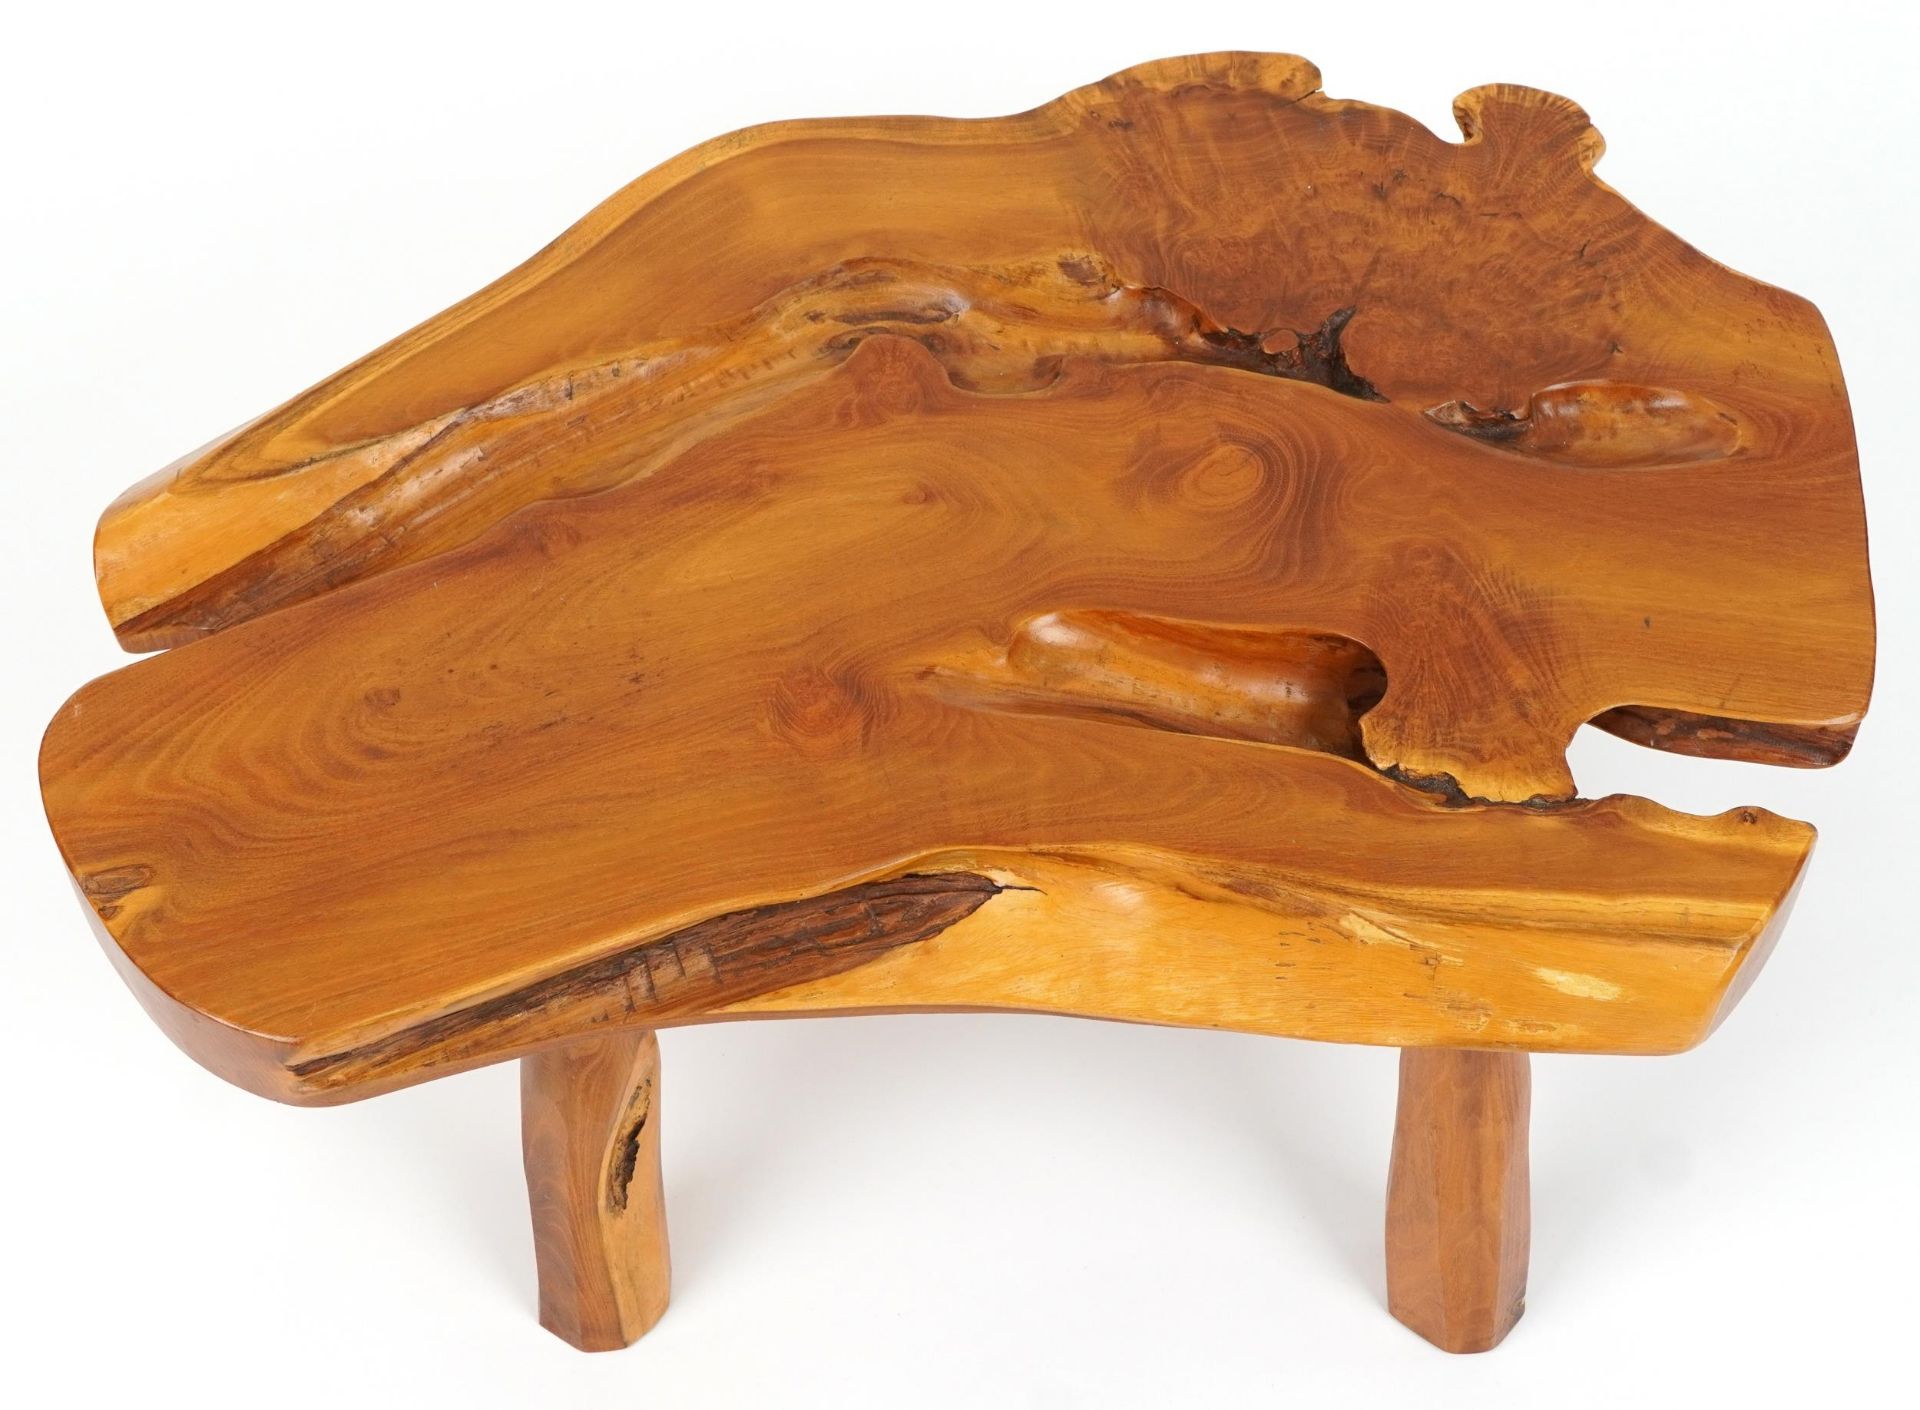 Vintage naturalistic root wood coffee table, 36.5cm H x 84cm W x 57cm D : For further information on - Image 3 of 4